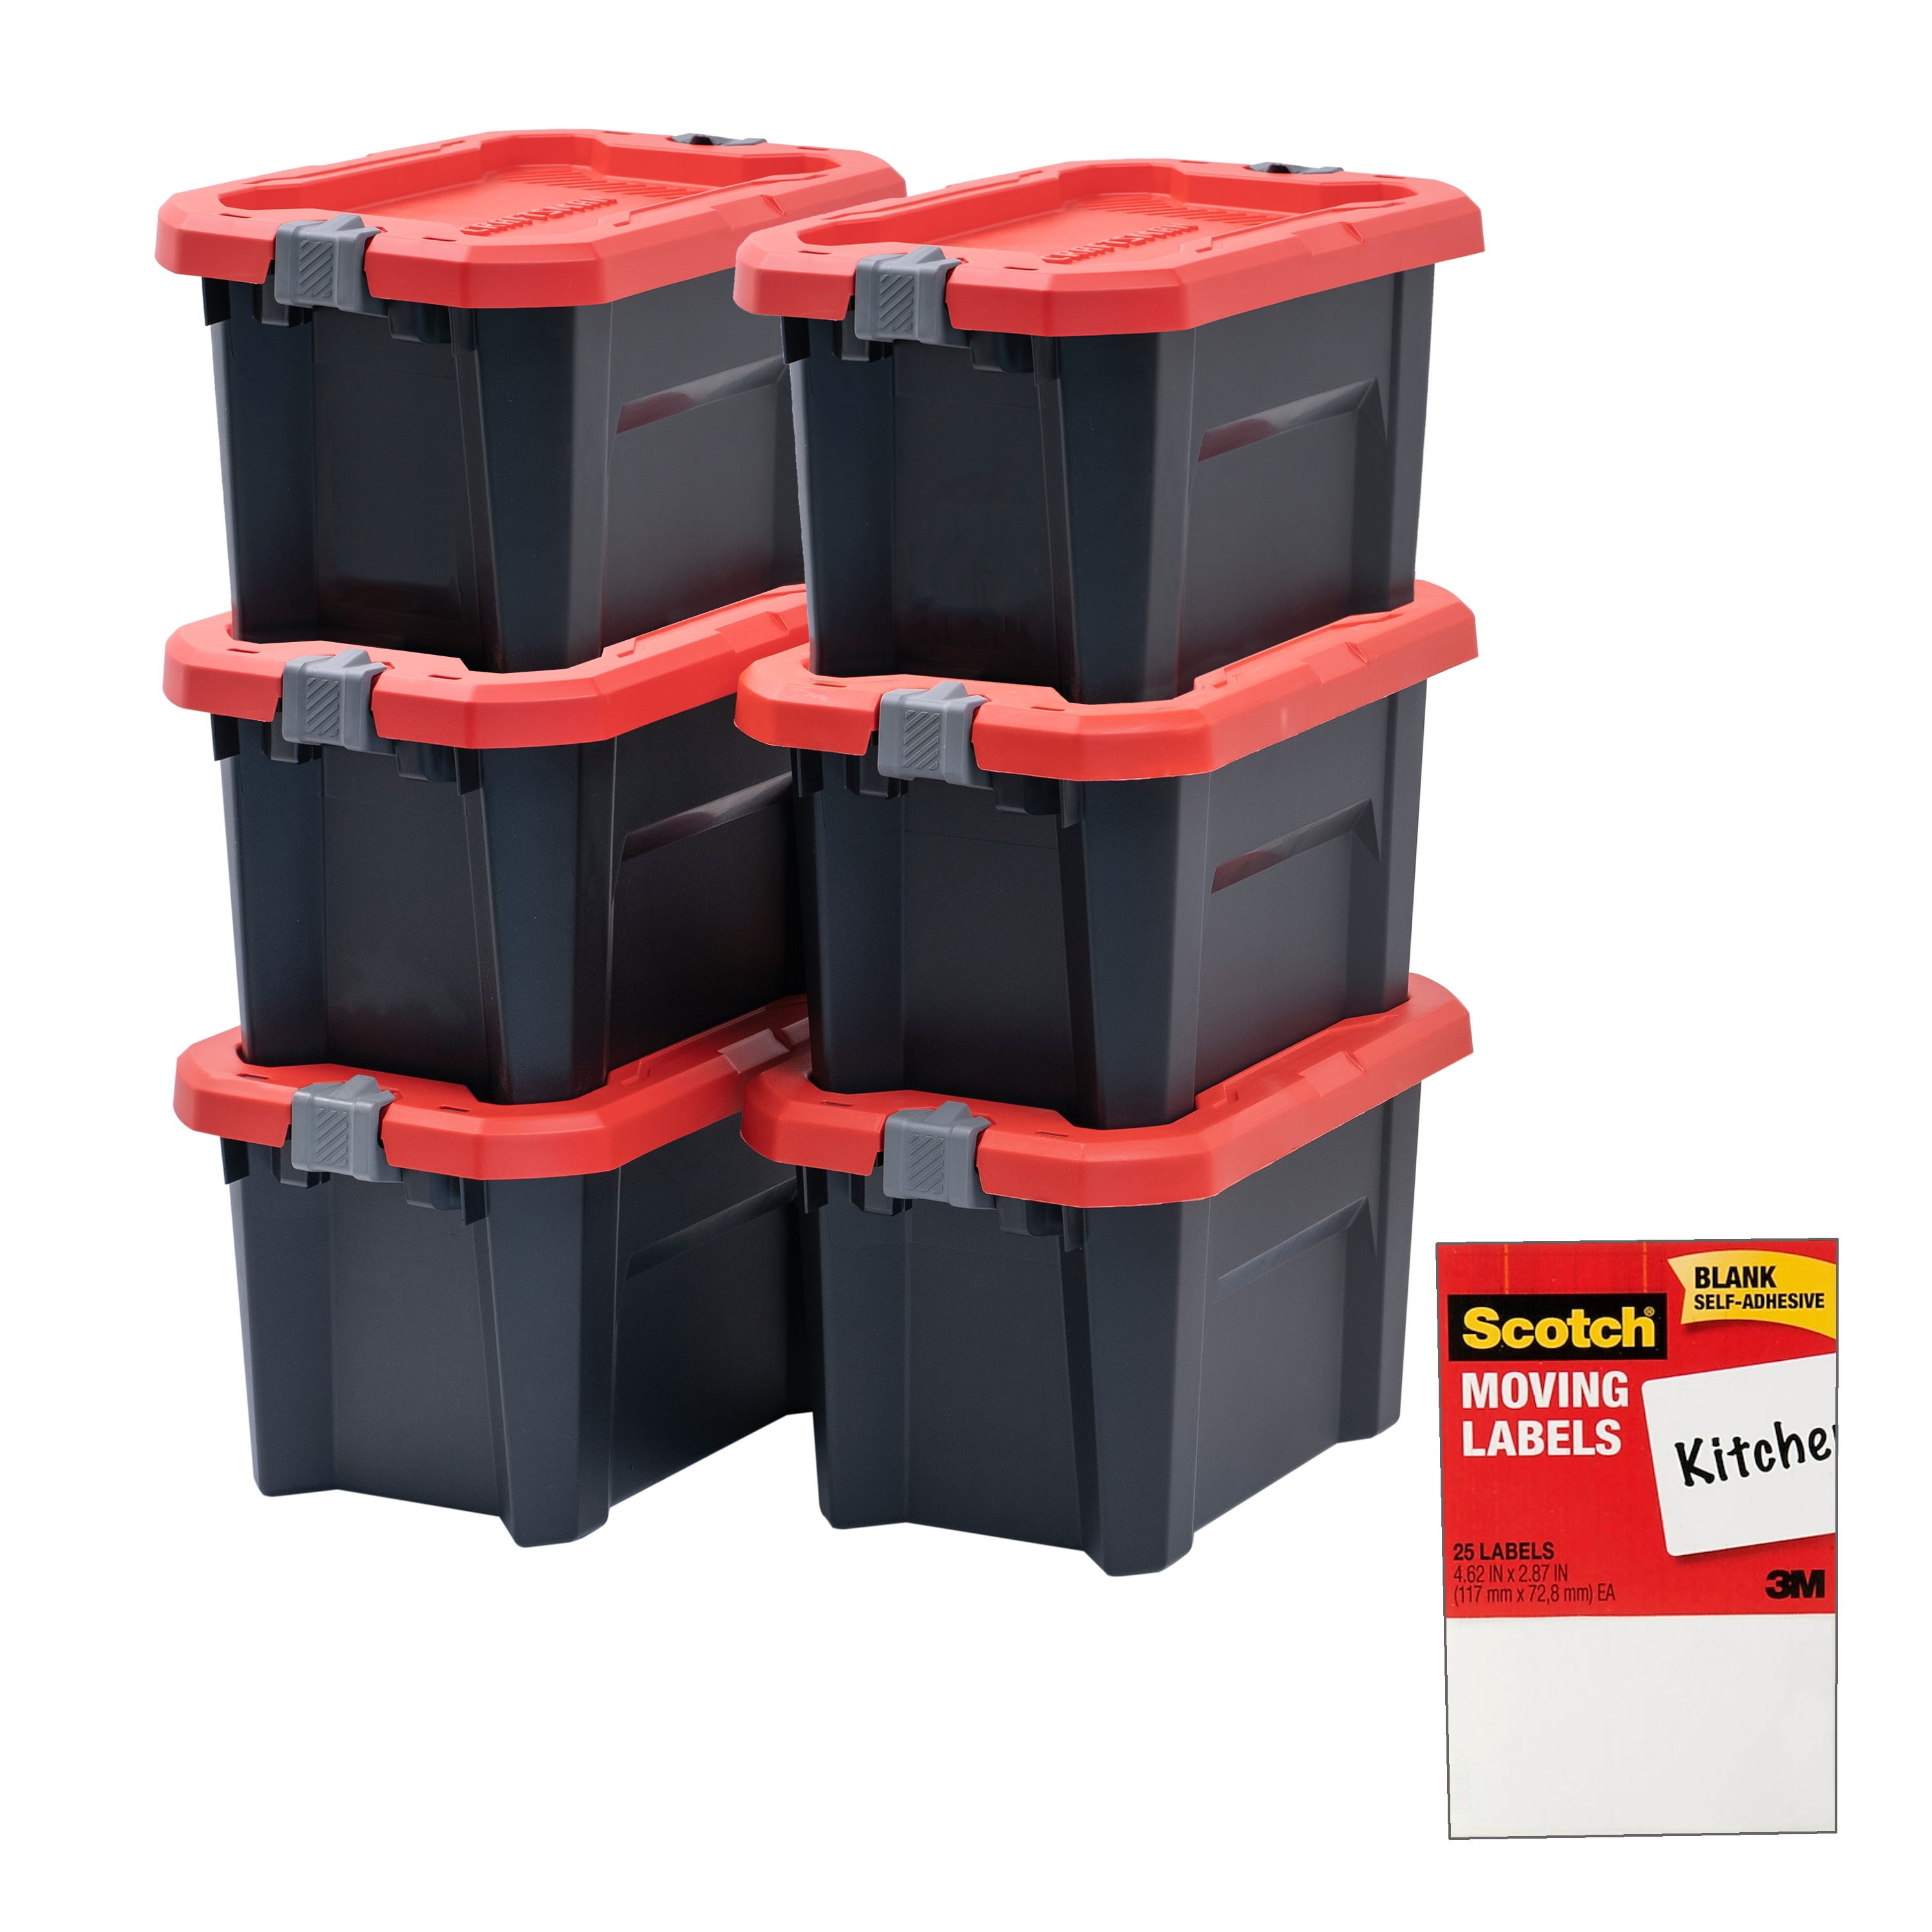 Shop CRAFTSMAN 4-Pack CRAFTSMAN Small 5-Gallons (20-Quart) Black Heavy Duty  Tote with latching lid at